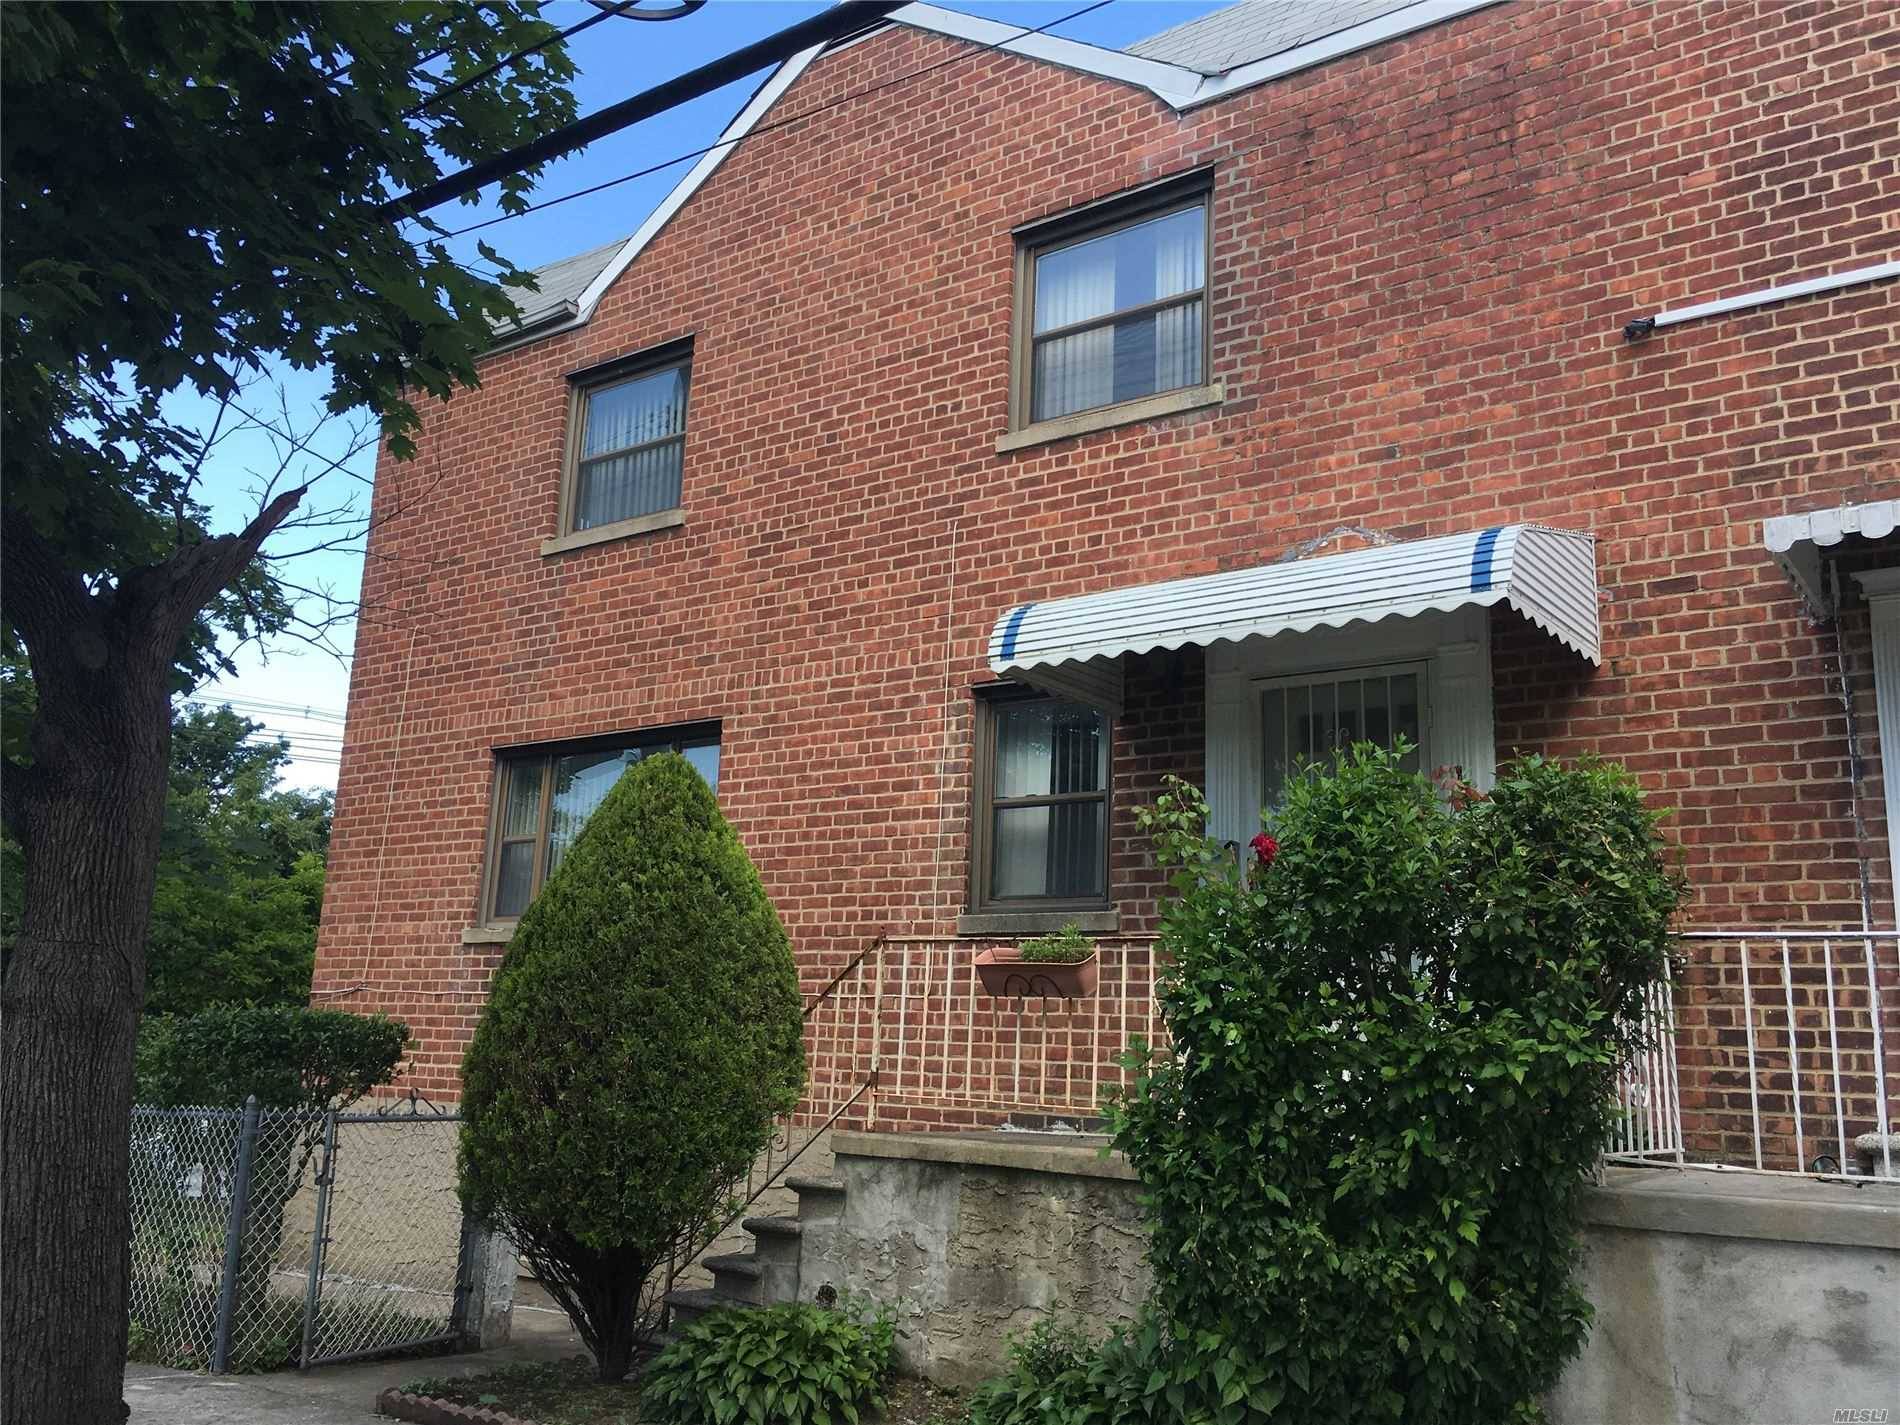 Semi attached single family Brick house located in the Throgs Neck section of the Bronx.